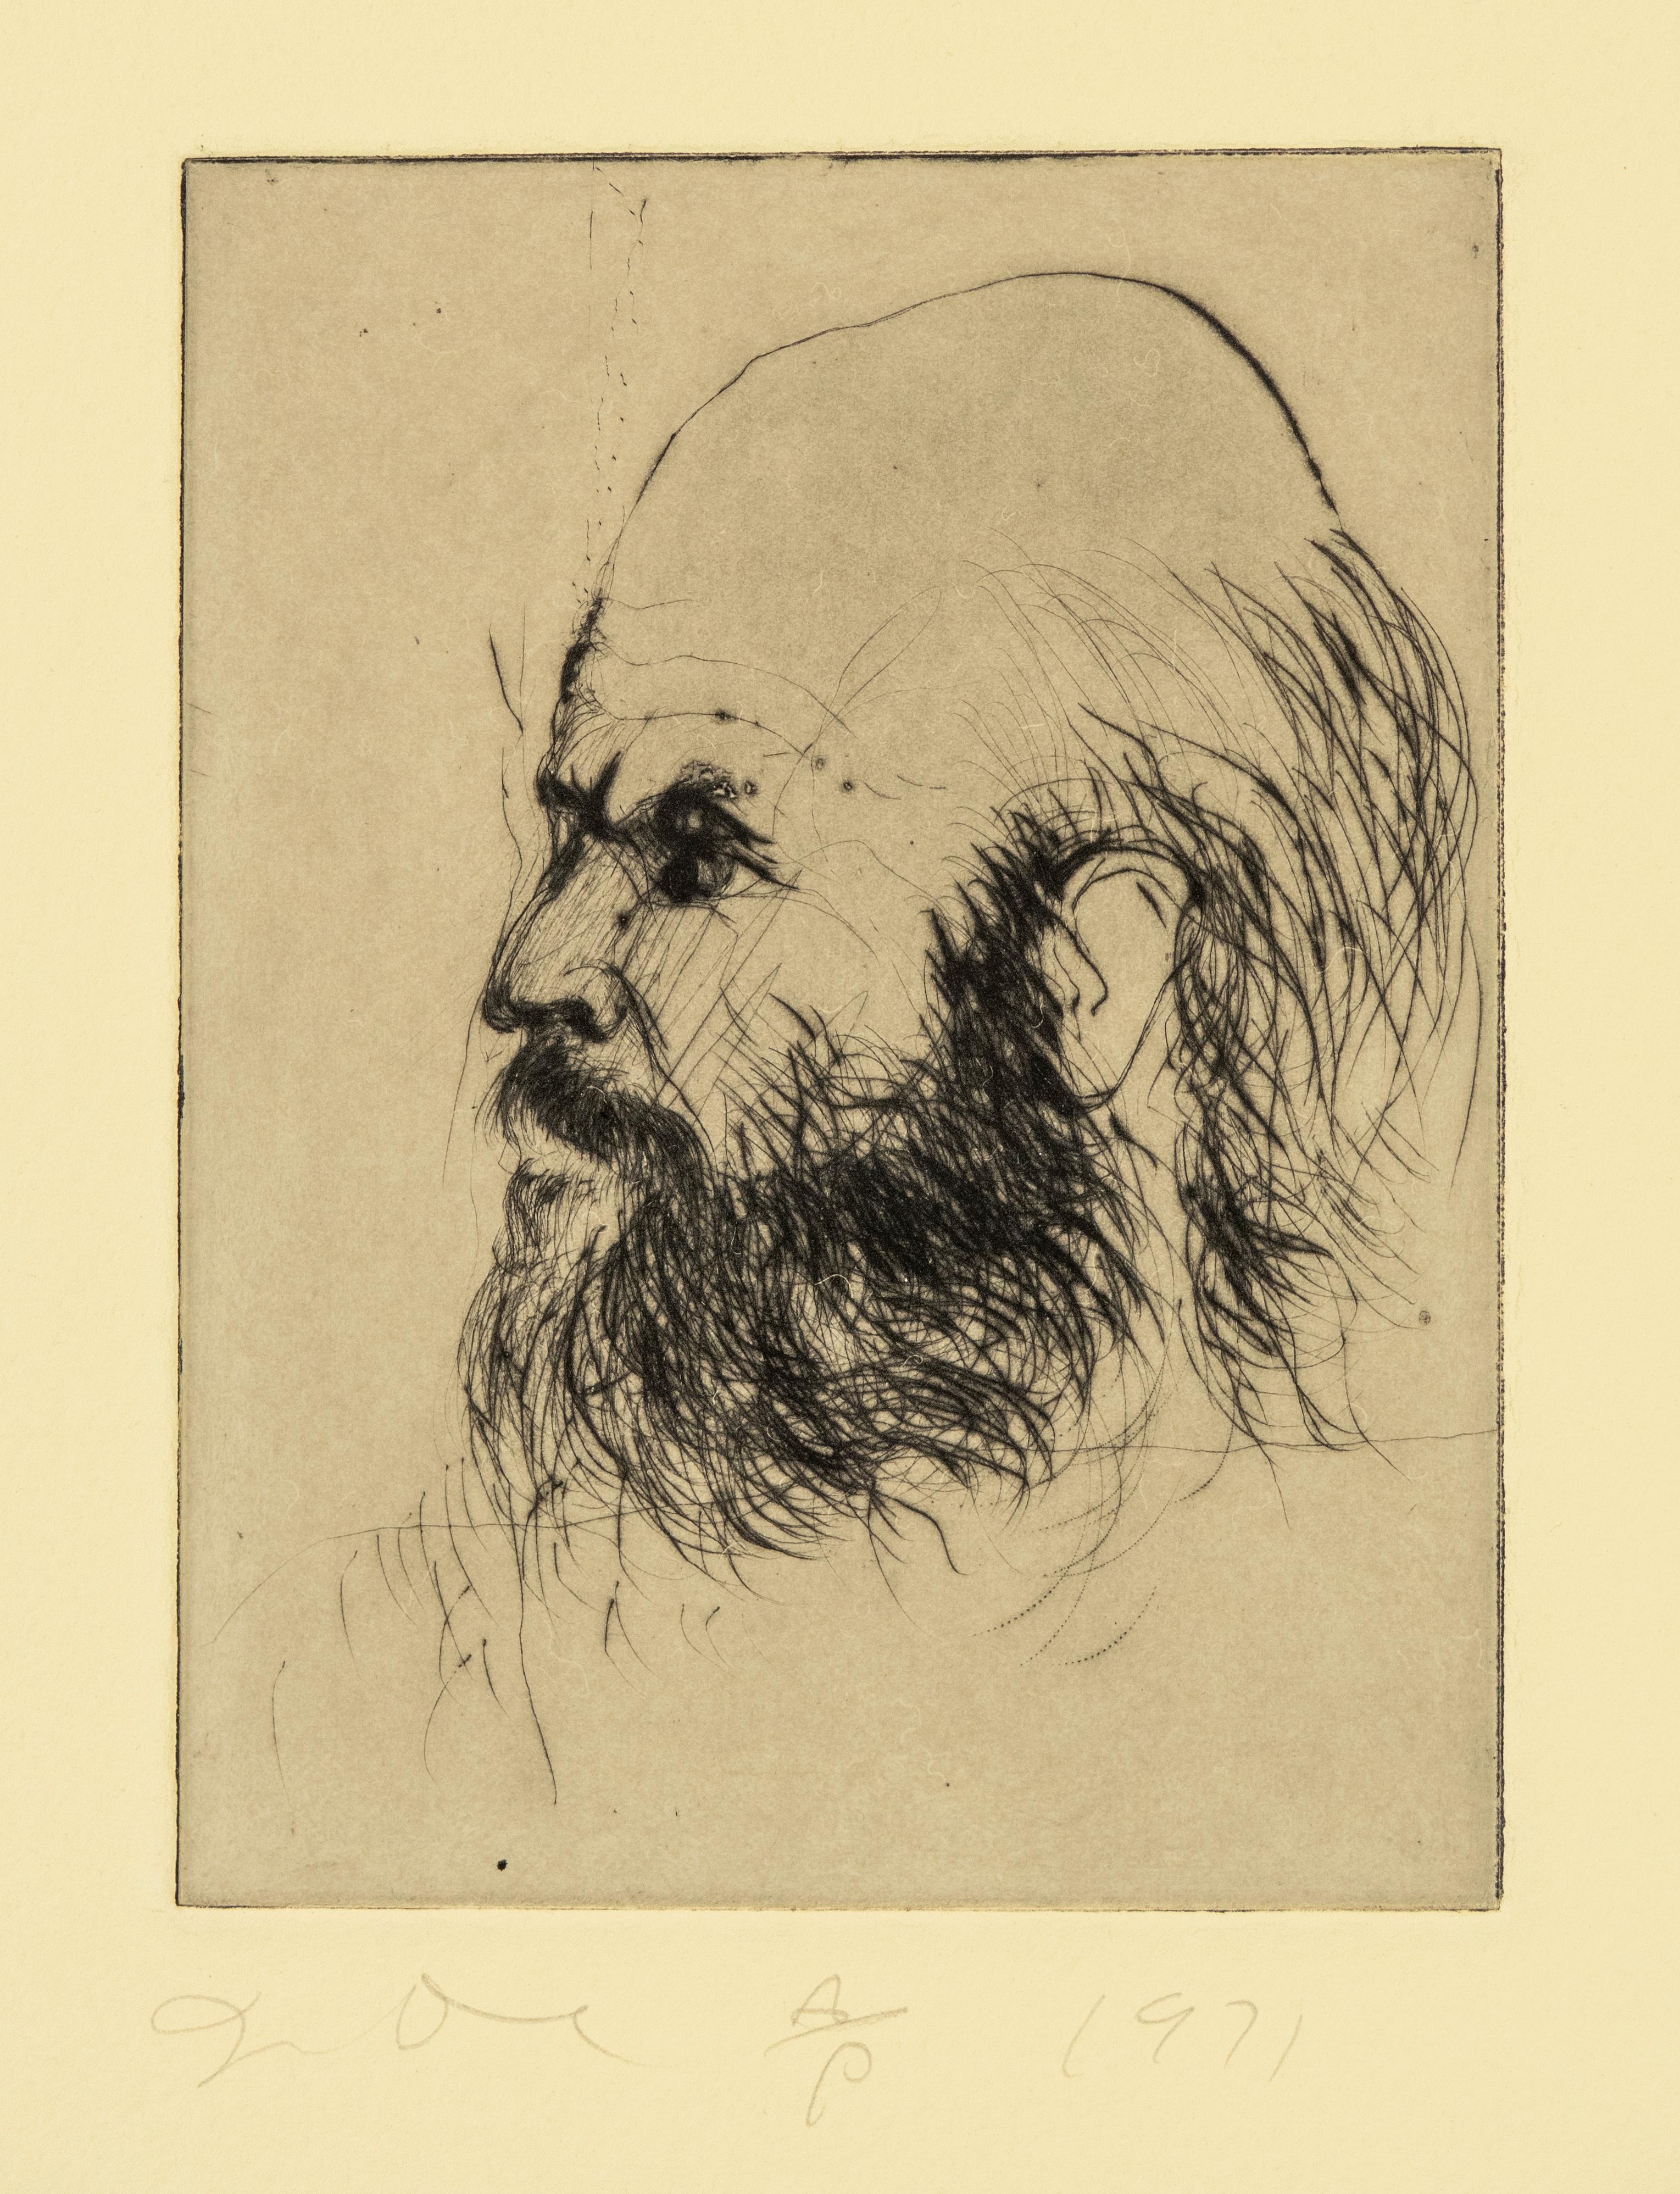 Jim Dine Self Portrait from 'Self Portraits' portfolio old masters style drawing